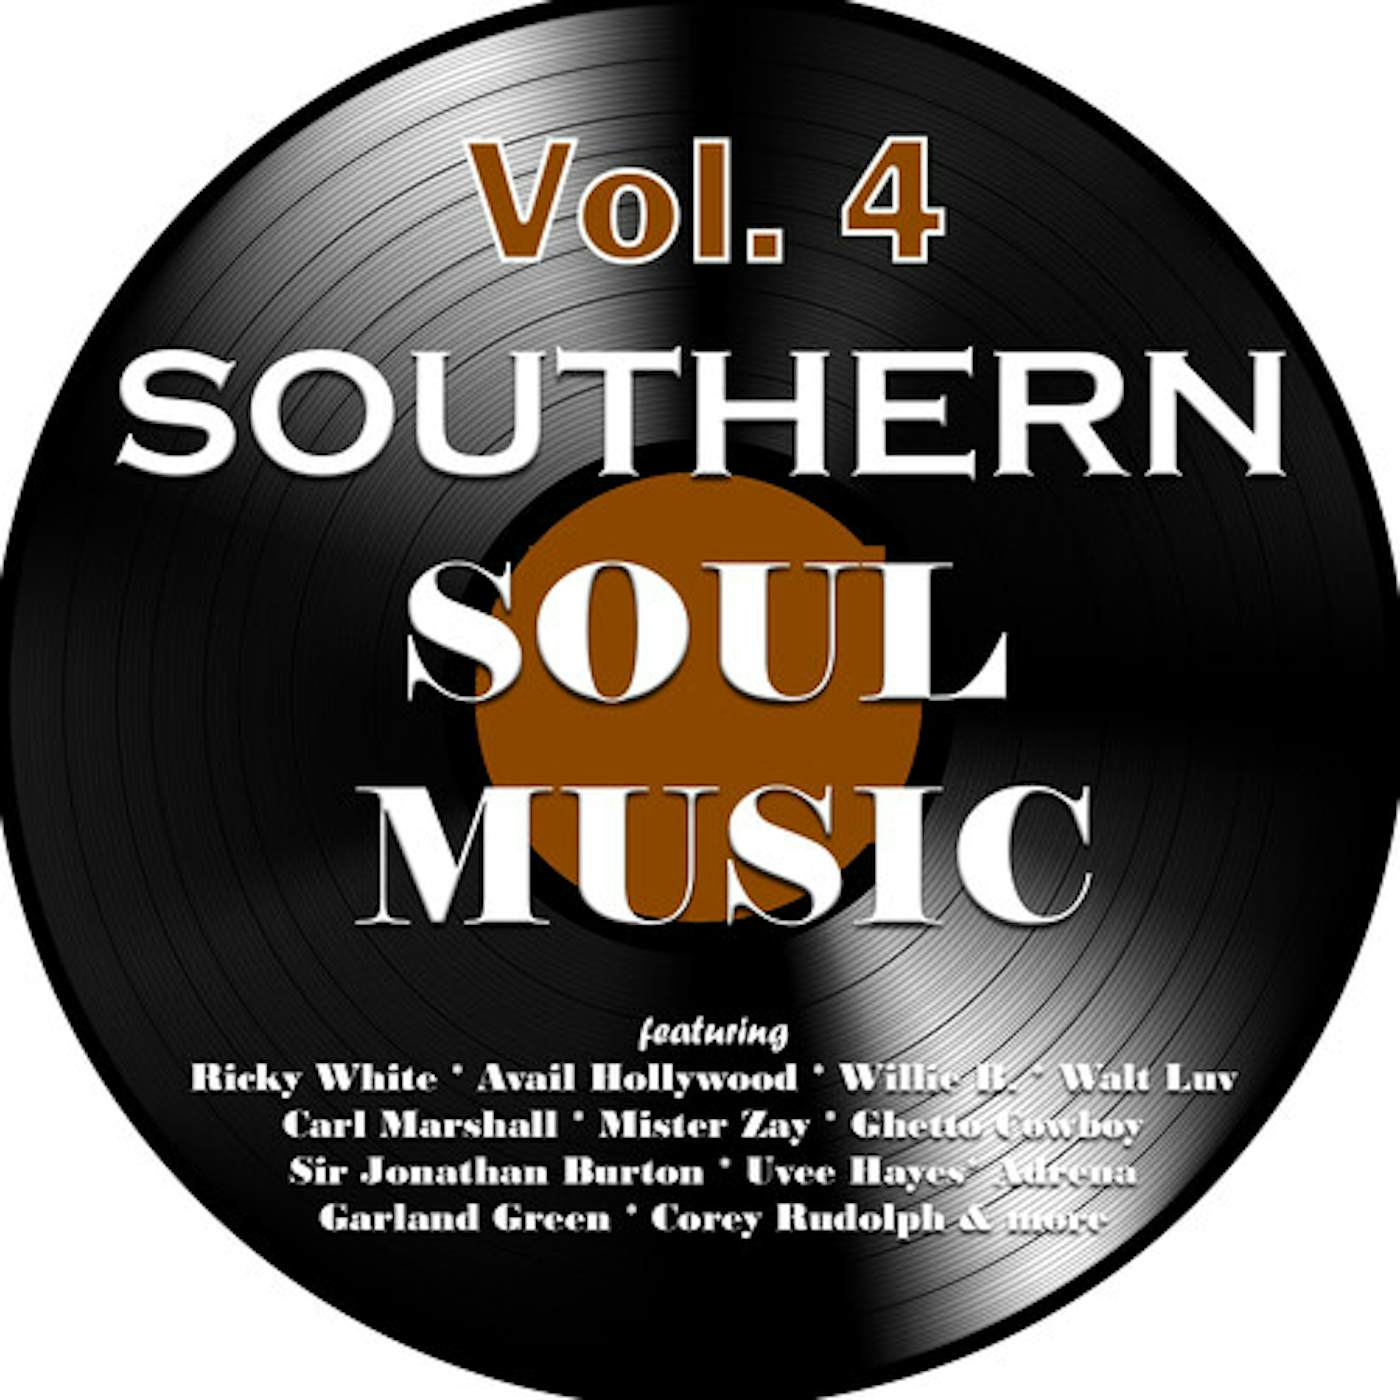 VARIOUS ARTISTS COMPILATION / VARIOUS SOUTHERN SOUL MUSIC VOLUME 4 / VARIOUS CD